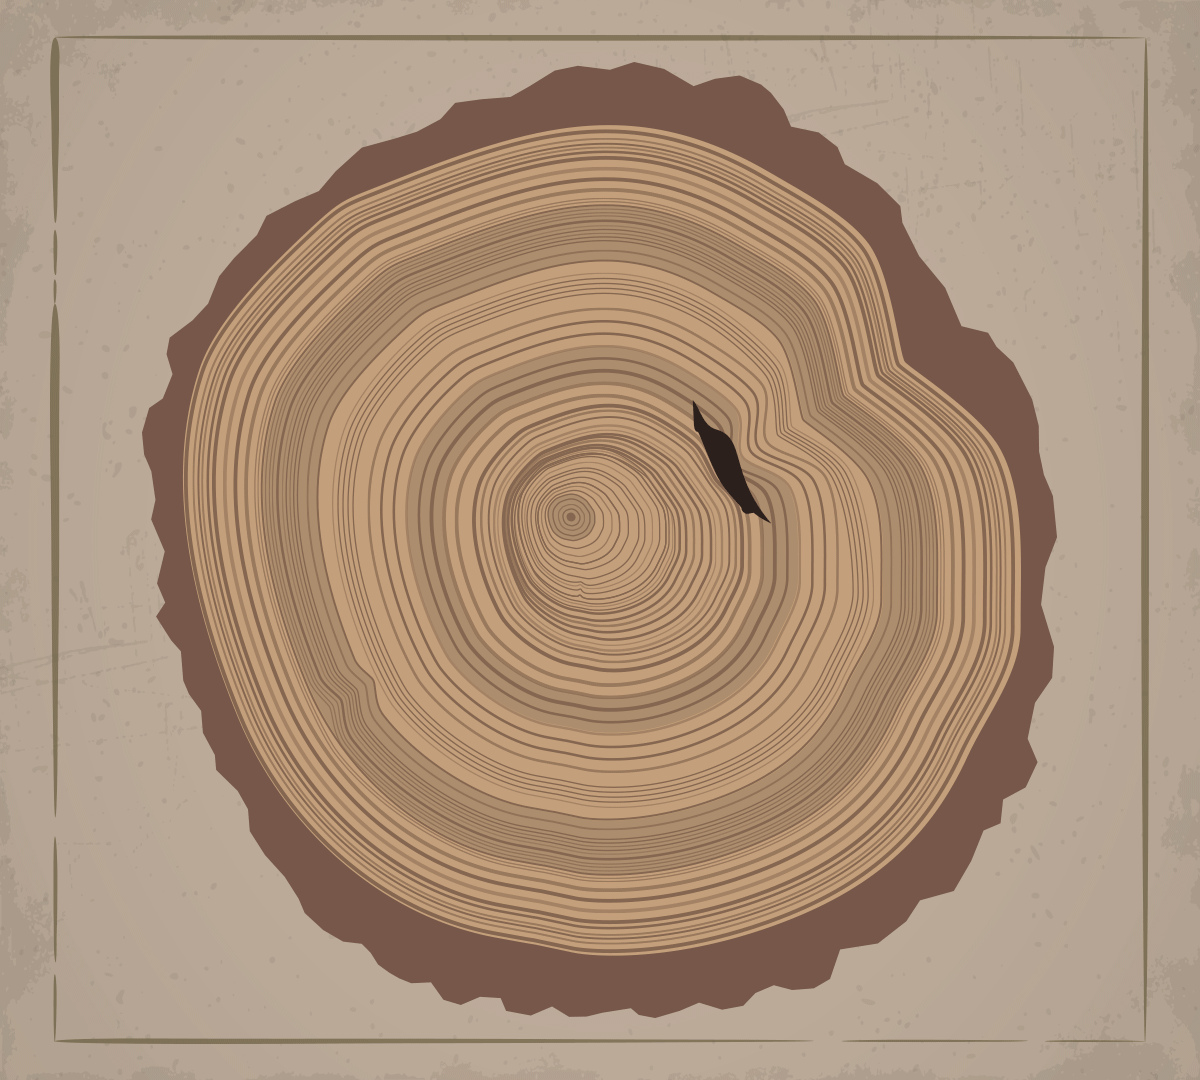 annual rings of wood illustration in minimal style 16415330 PNG